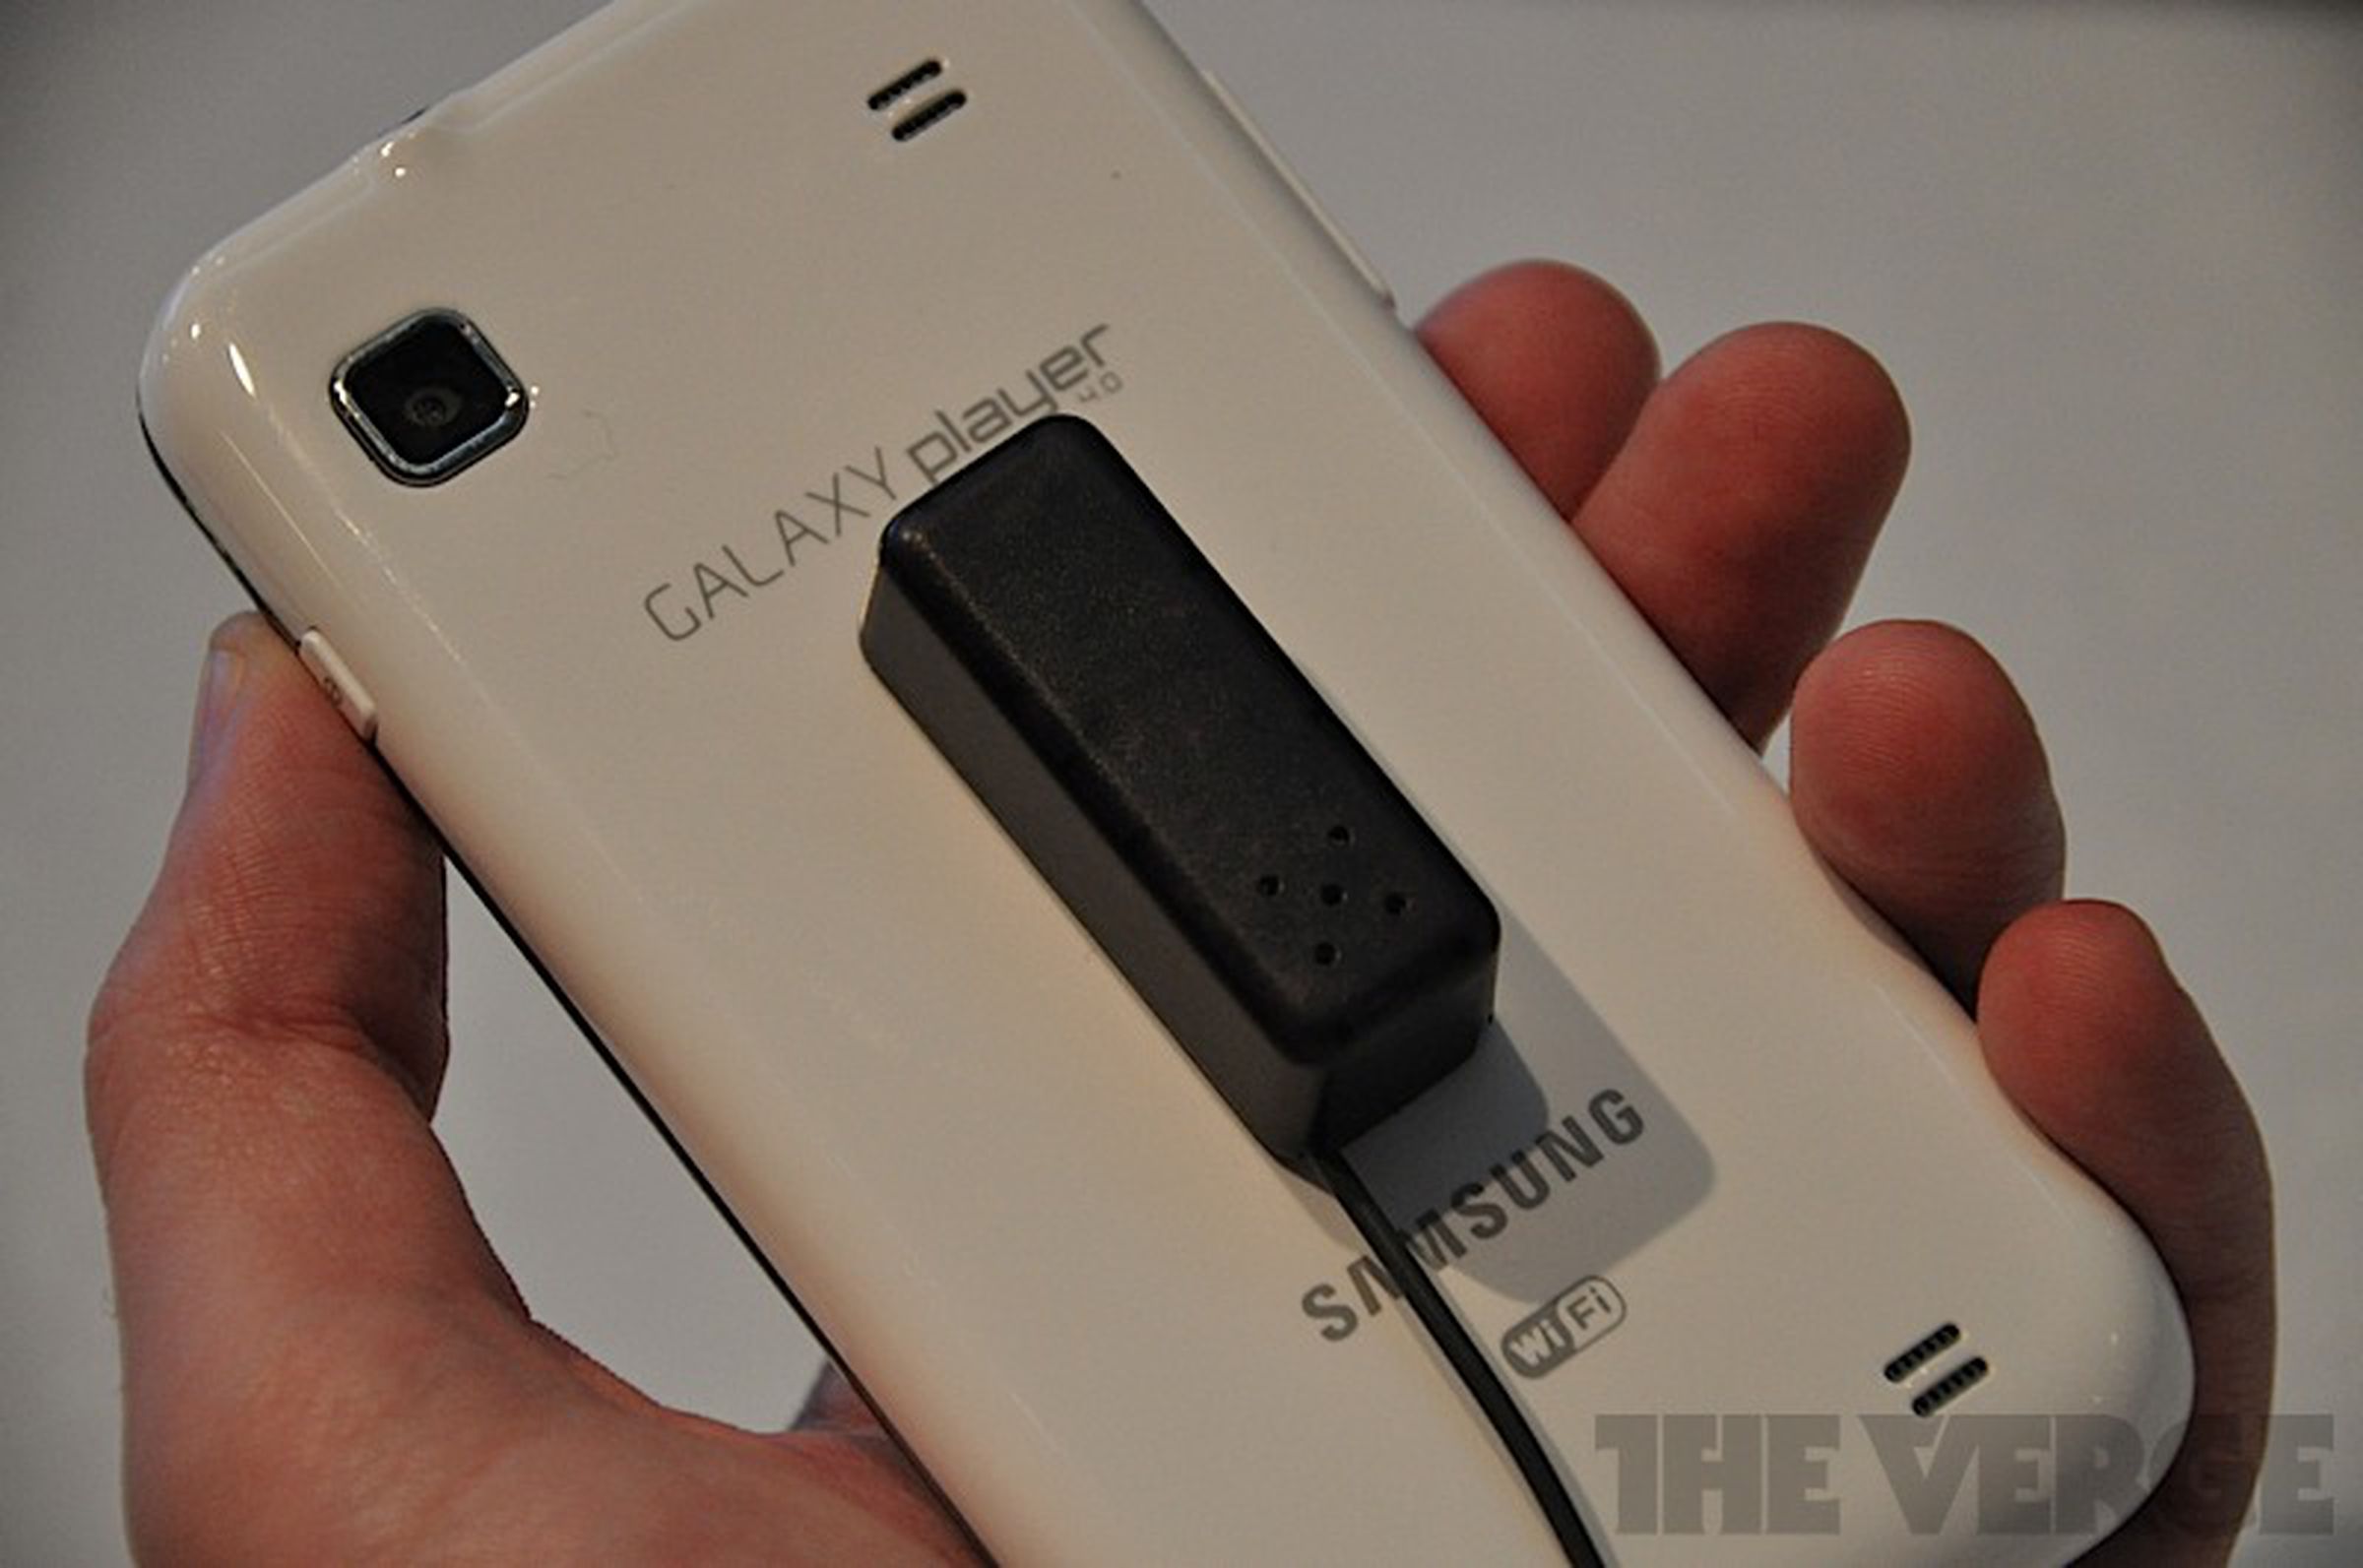 Samsung Galaxy Player 4.0 and 5.0 hands-on photos